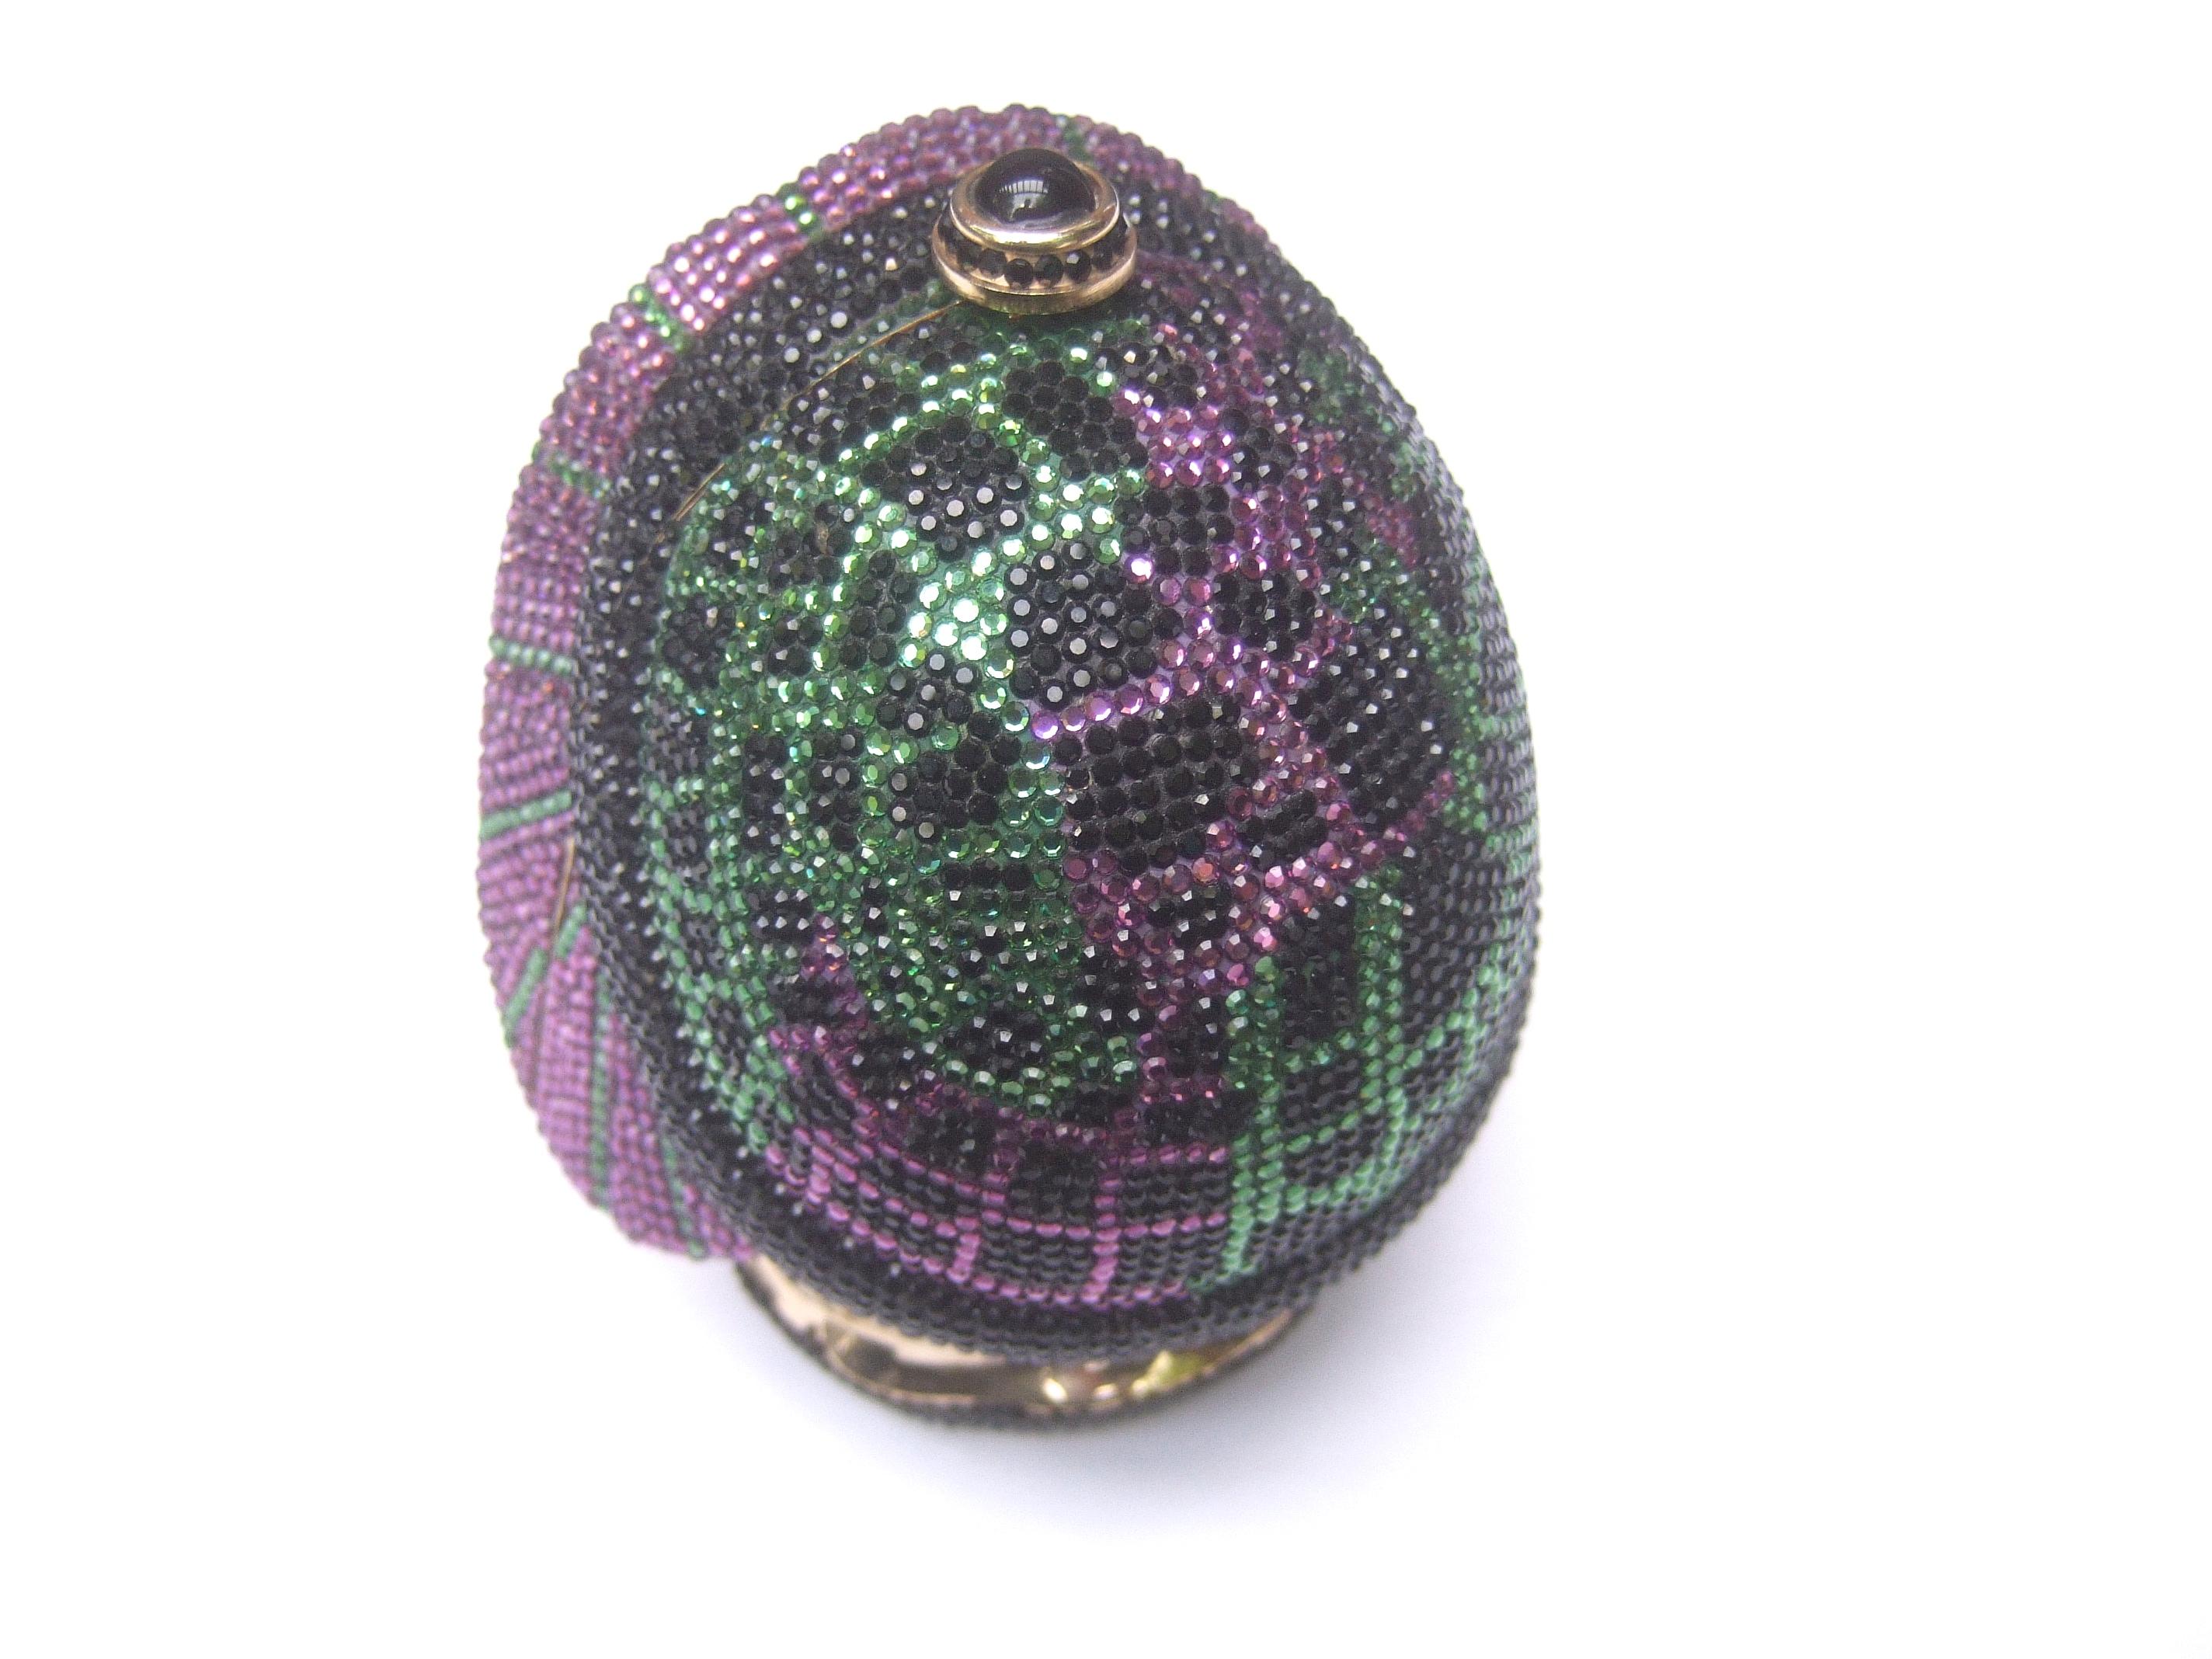 Judith Leiber Exquisite Crystal Encrusted Figural Woman Minaudière circa 1980s For Sale 8